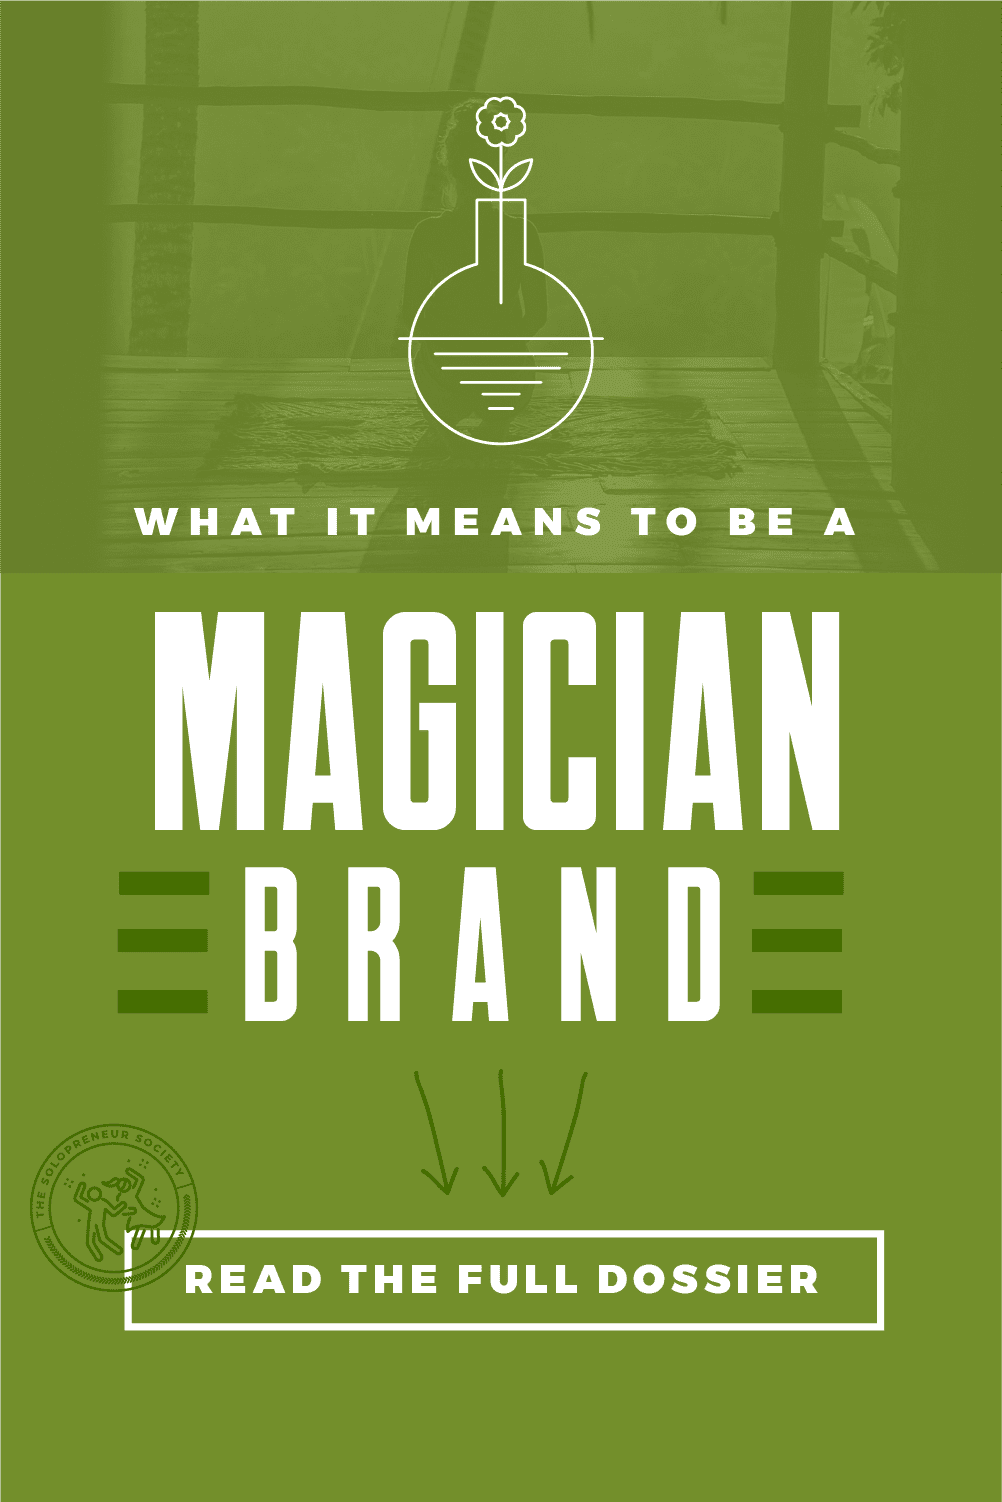 Magician Brand Personality